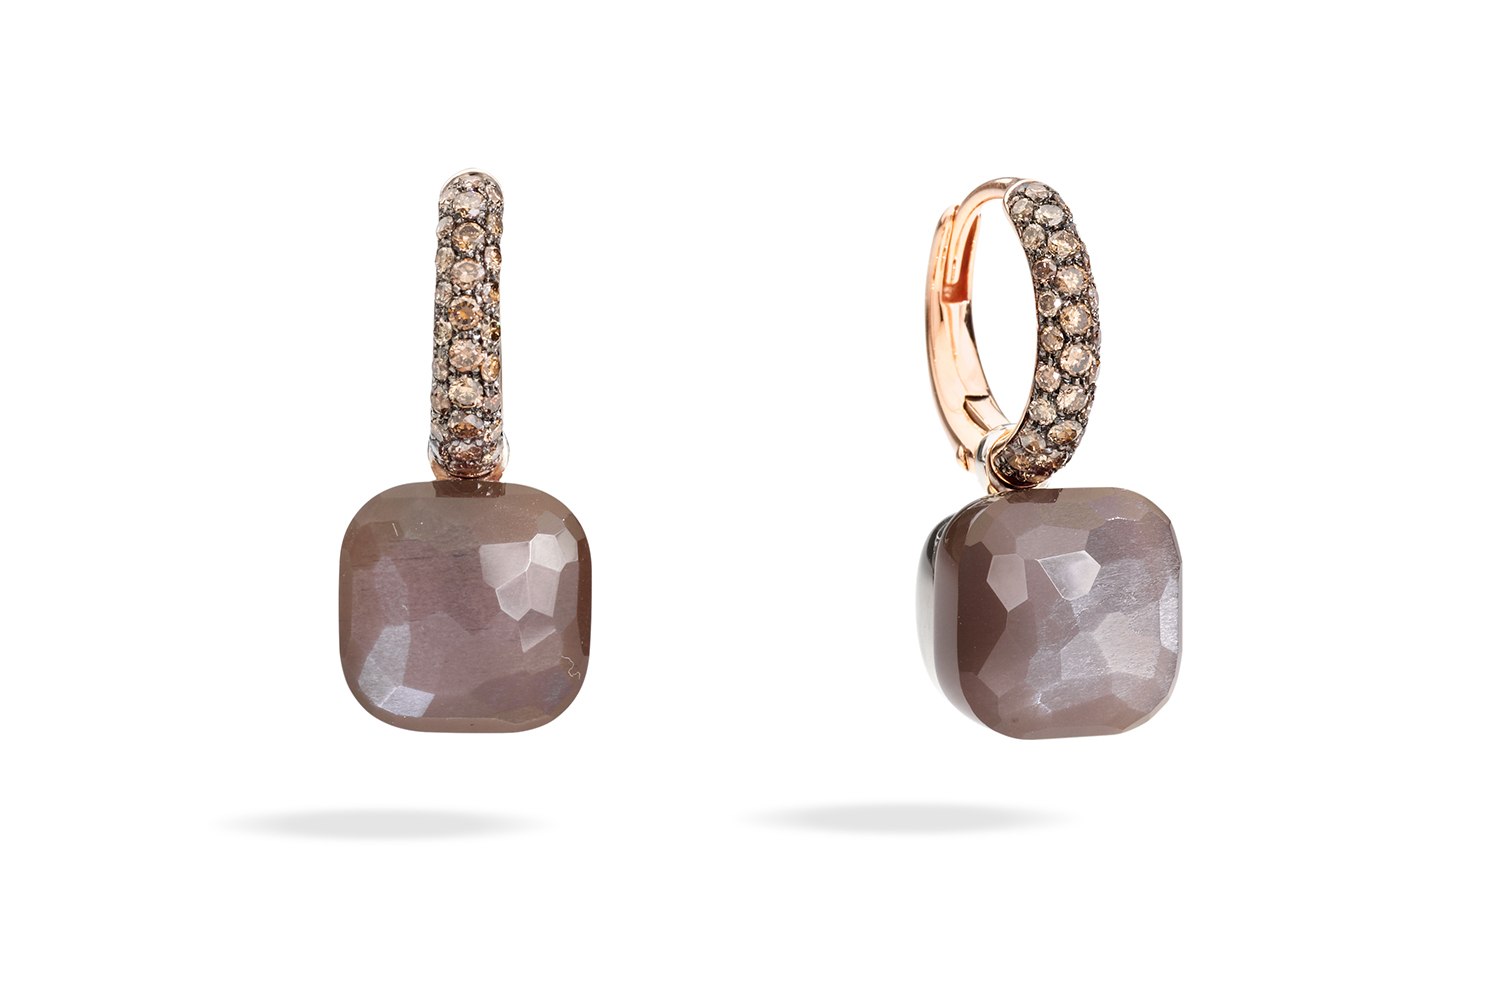 NUDO-CHOCOLATE-earrings-in-rose-gold-with-dark-brown-moonstone-and-brown-diamonds-by-Pomellato-–-kopia